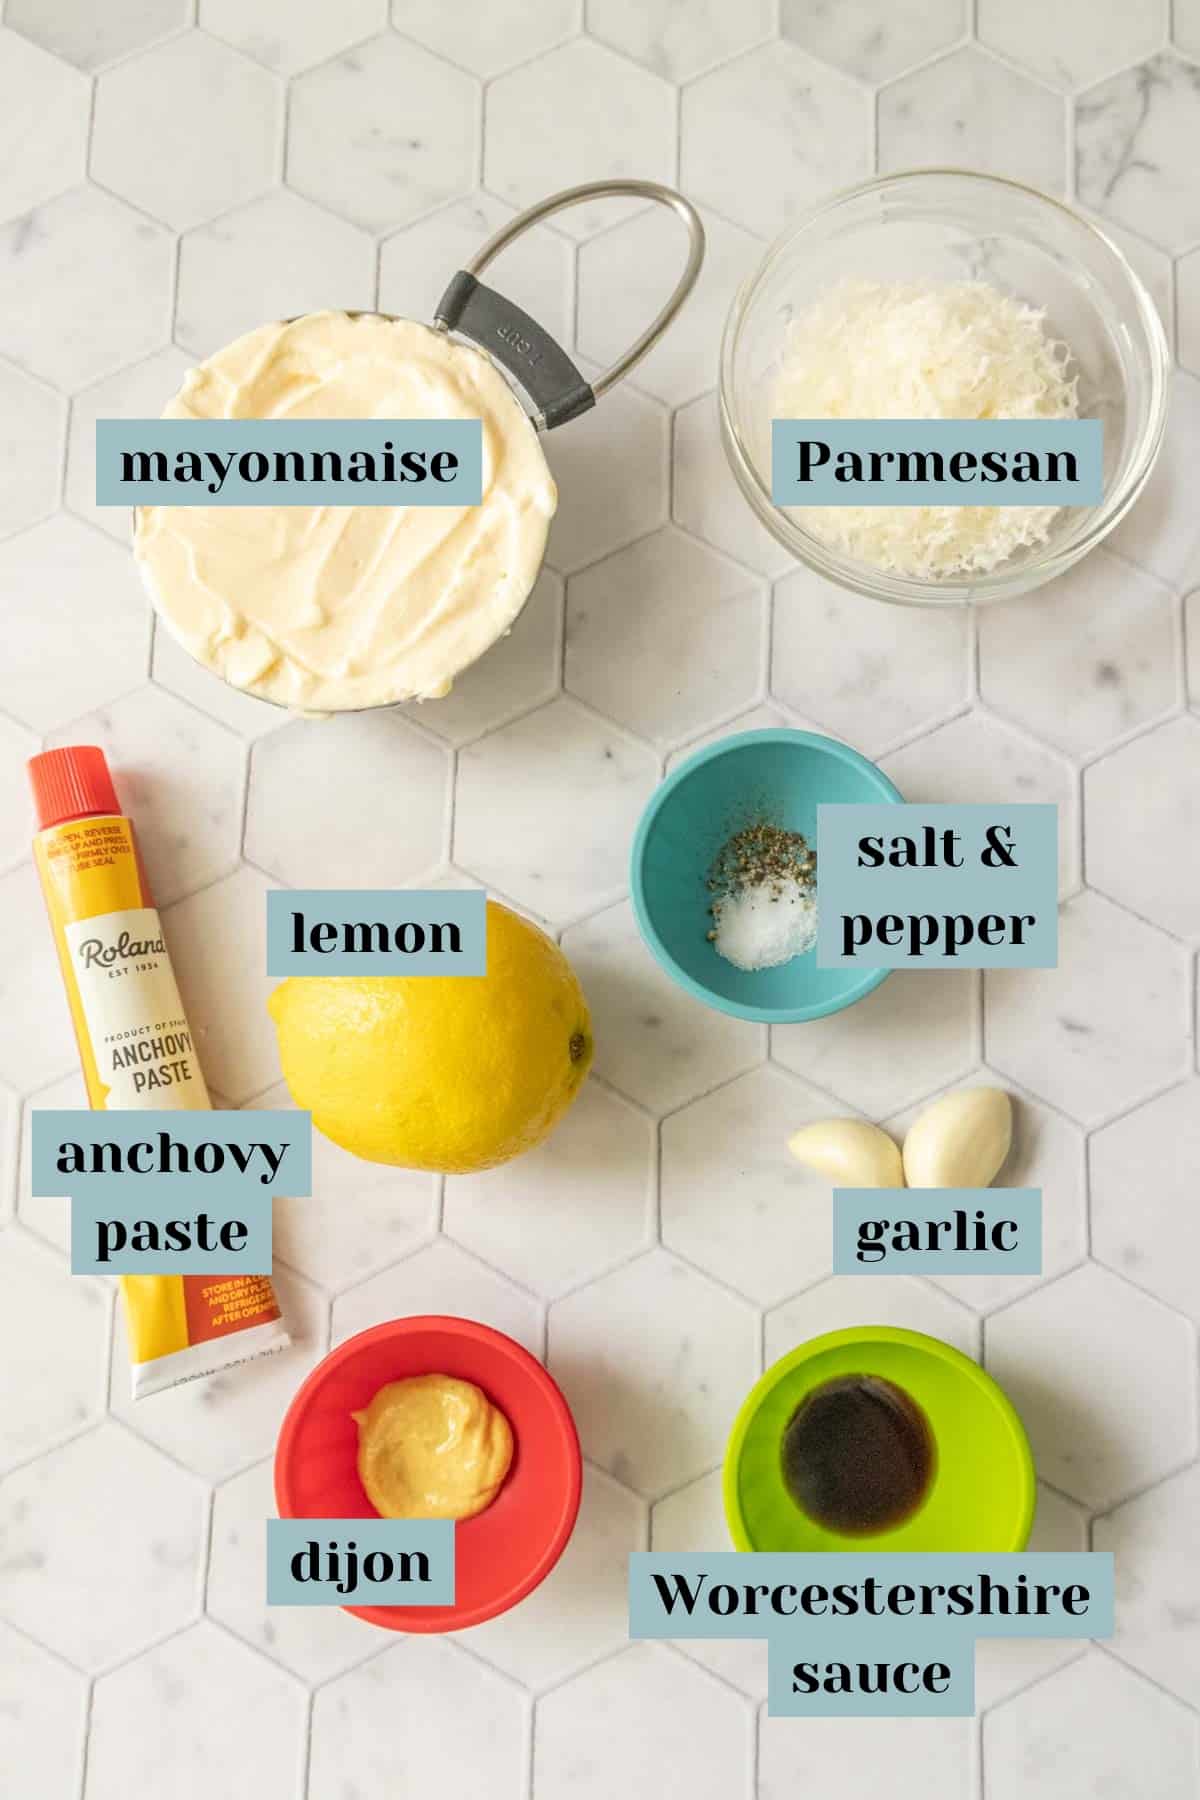 Ingredients for Caesar salad dressing on a tile surface with labels.